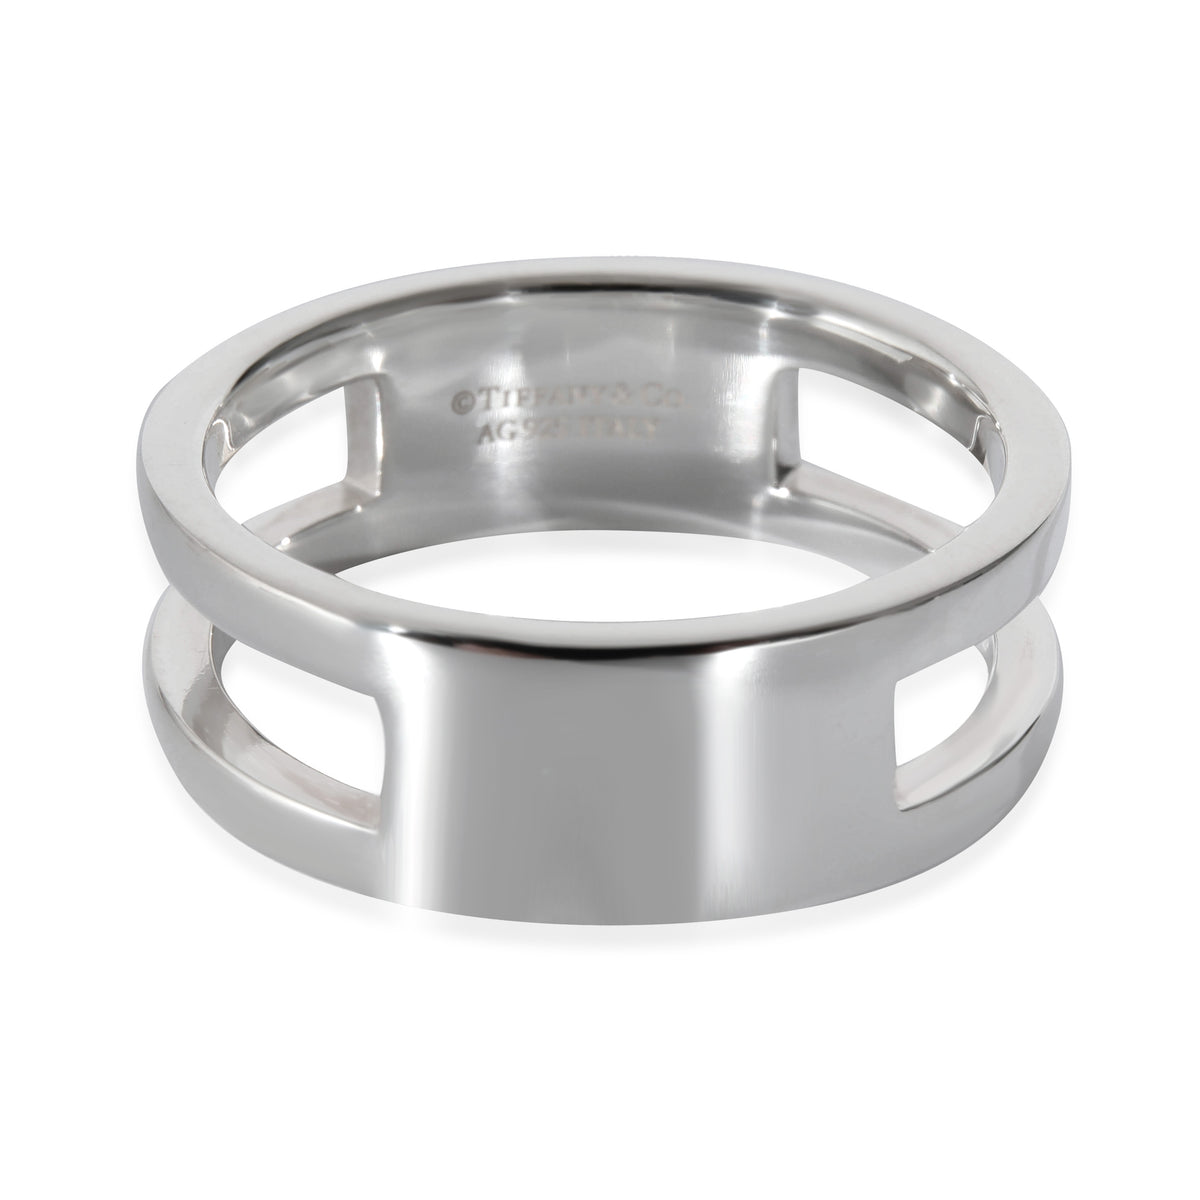 Tiffany & Co. 8.5mm Large ID Band in Sterling Silver, myGemma